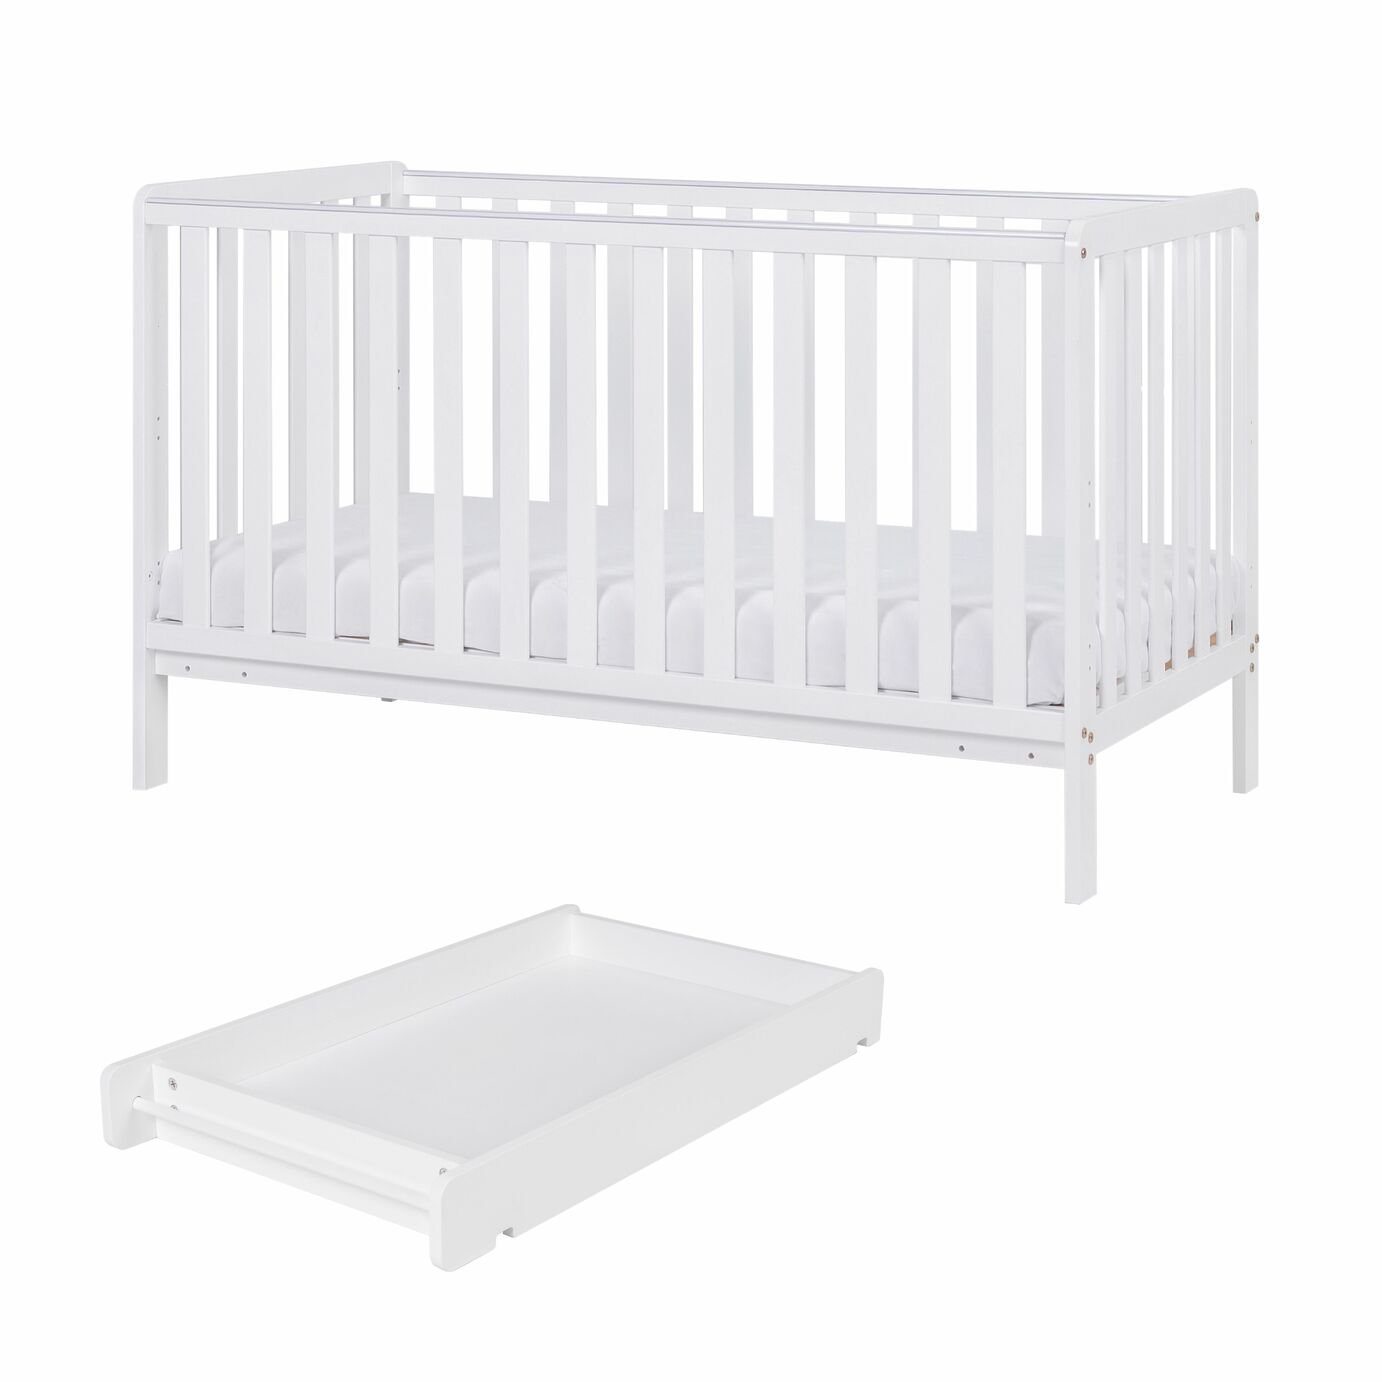 Malmo Baby Cot Bed, Cot Top Changer with Mattress Review